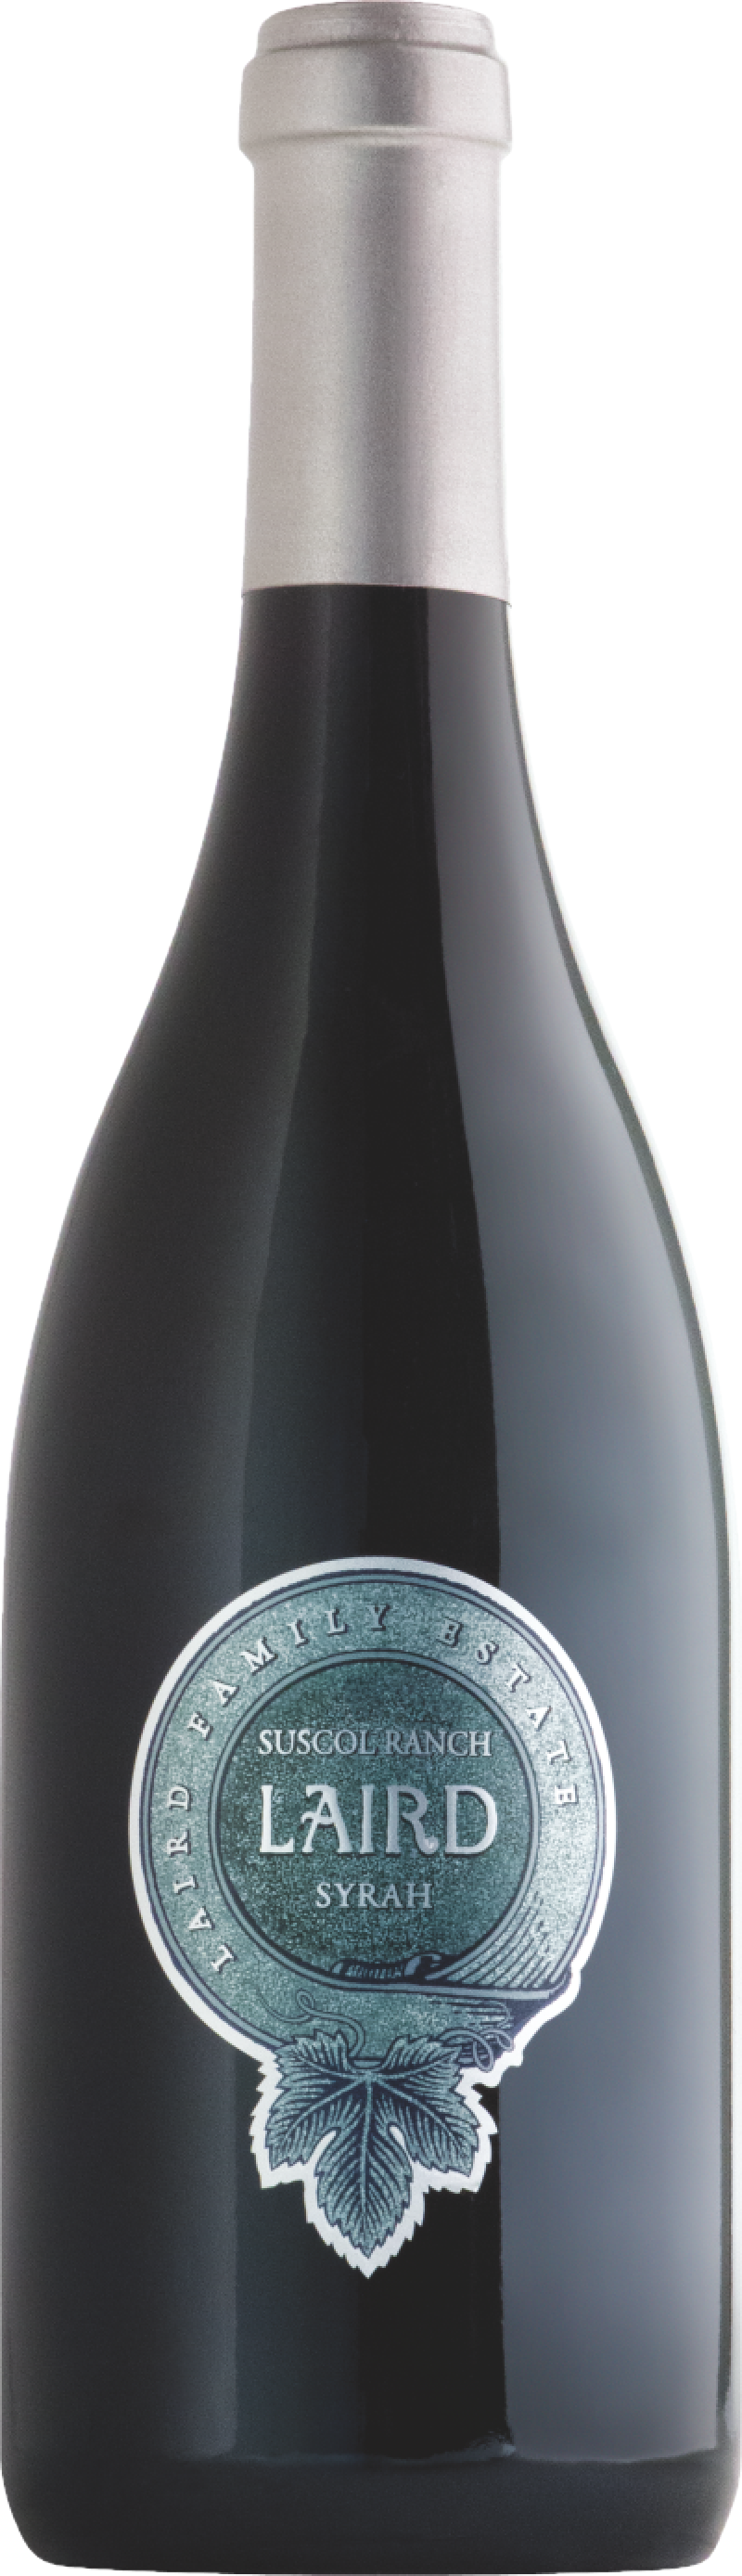 Product Image for 2018 Suscol Ranch Syrah